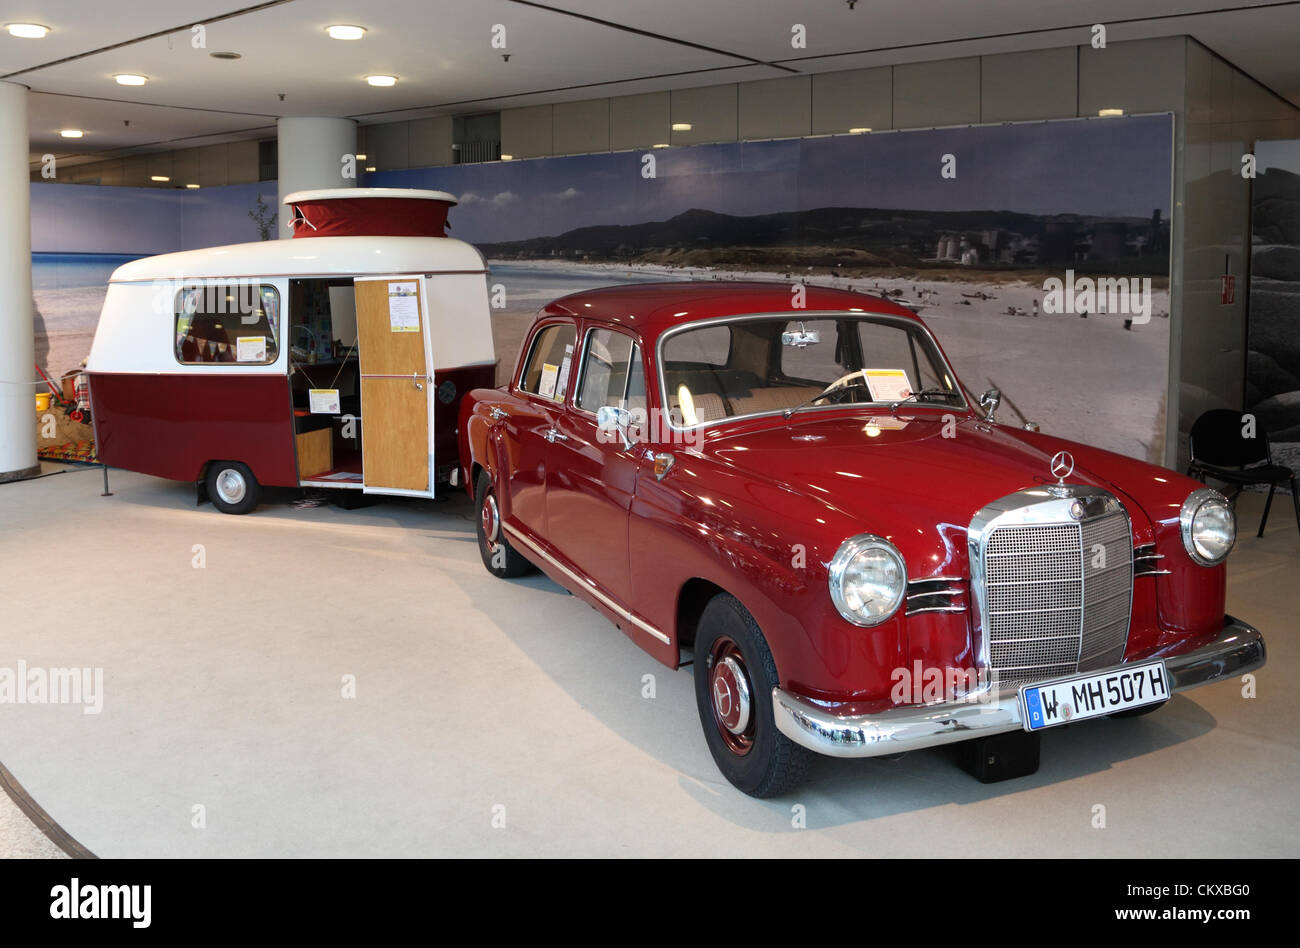 DUESSELDORF - AUGUST 27: Mercedes Benz W120 car from 1962 with Eriba Puck  caravan at the Caravan Salon Exhibition 2012 on August 27, 2012 in  Düsseldorf, Germany Stock Photo - Alamy